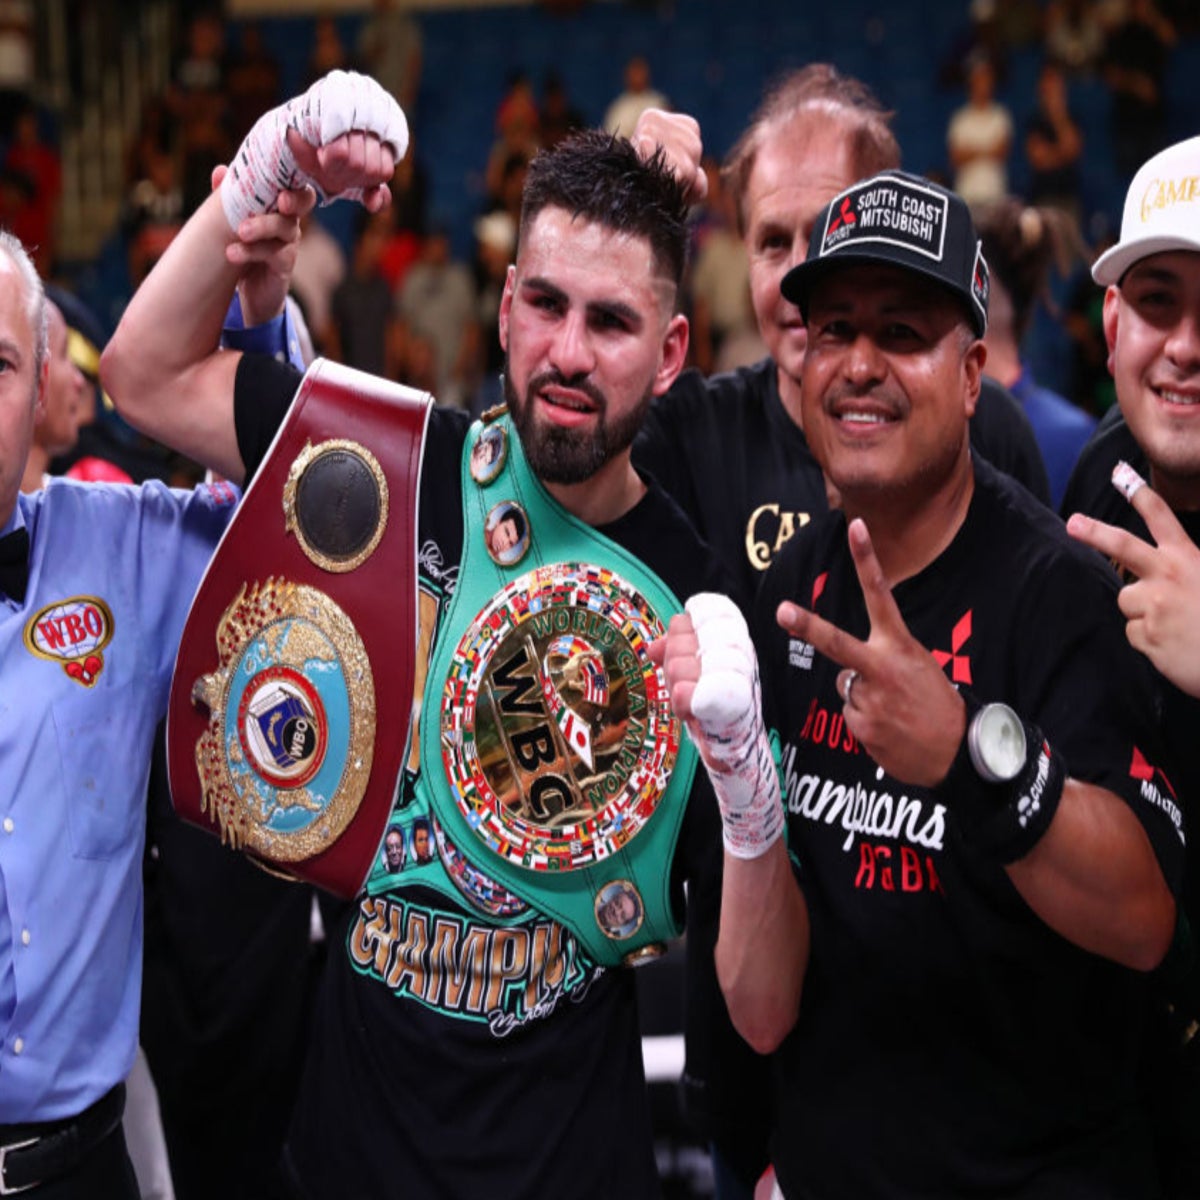 Josh Taylor vs. Jose Ramirez junior welterweight undisputed title fight set  for May 22